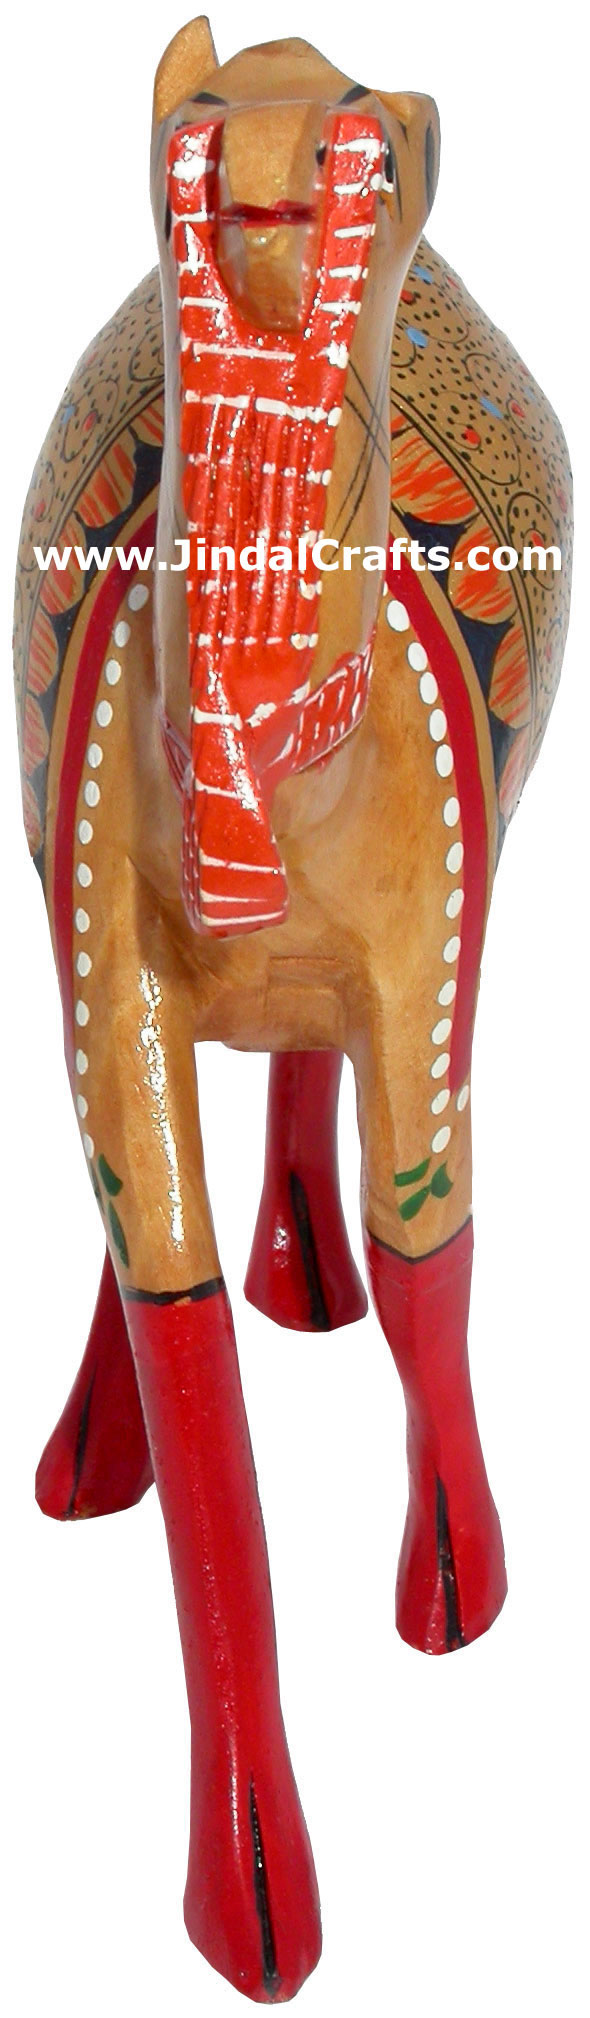 Hand Carved Hand Painted Wood Camel India Art Jungle Sculpture Home Decor Crafts